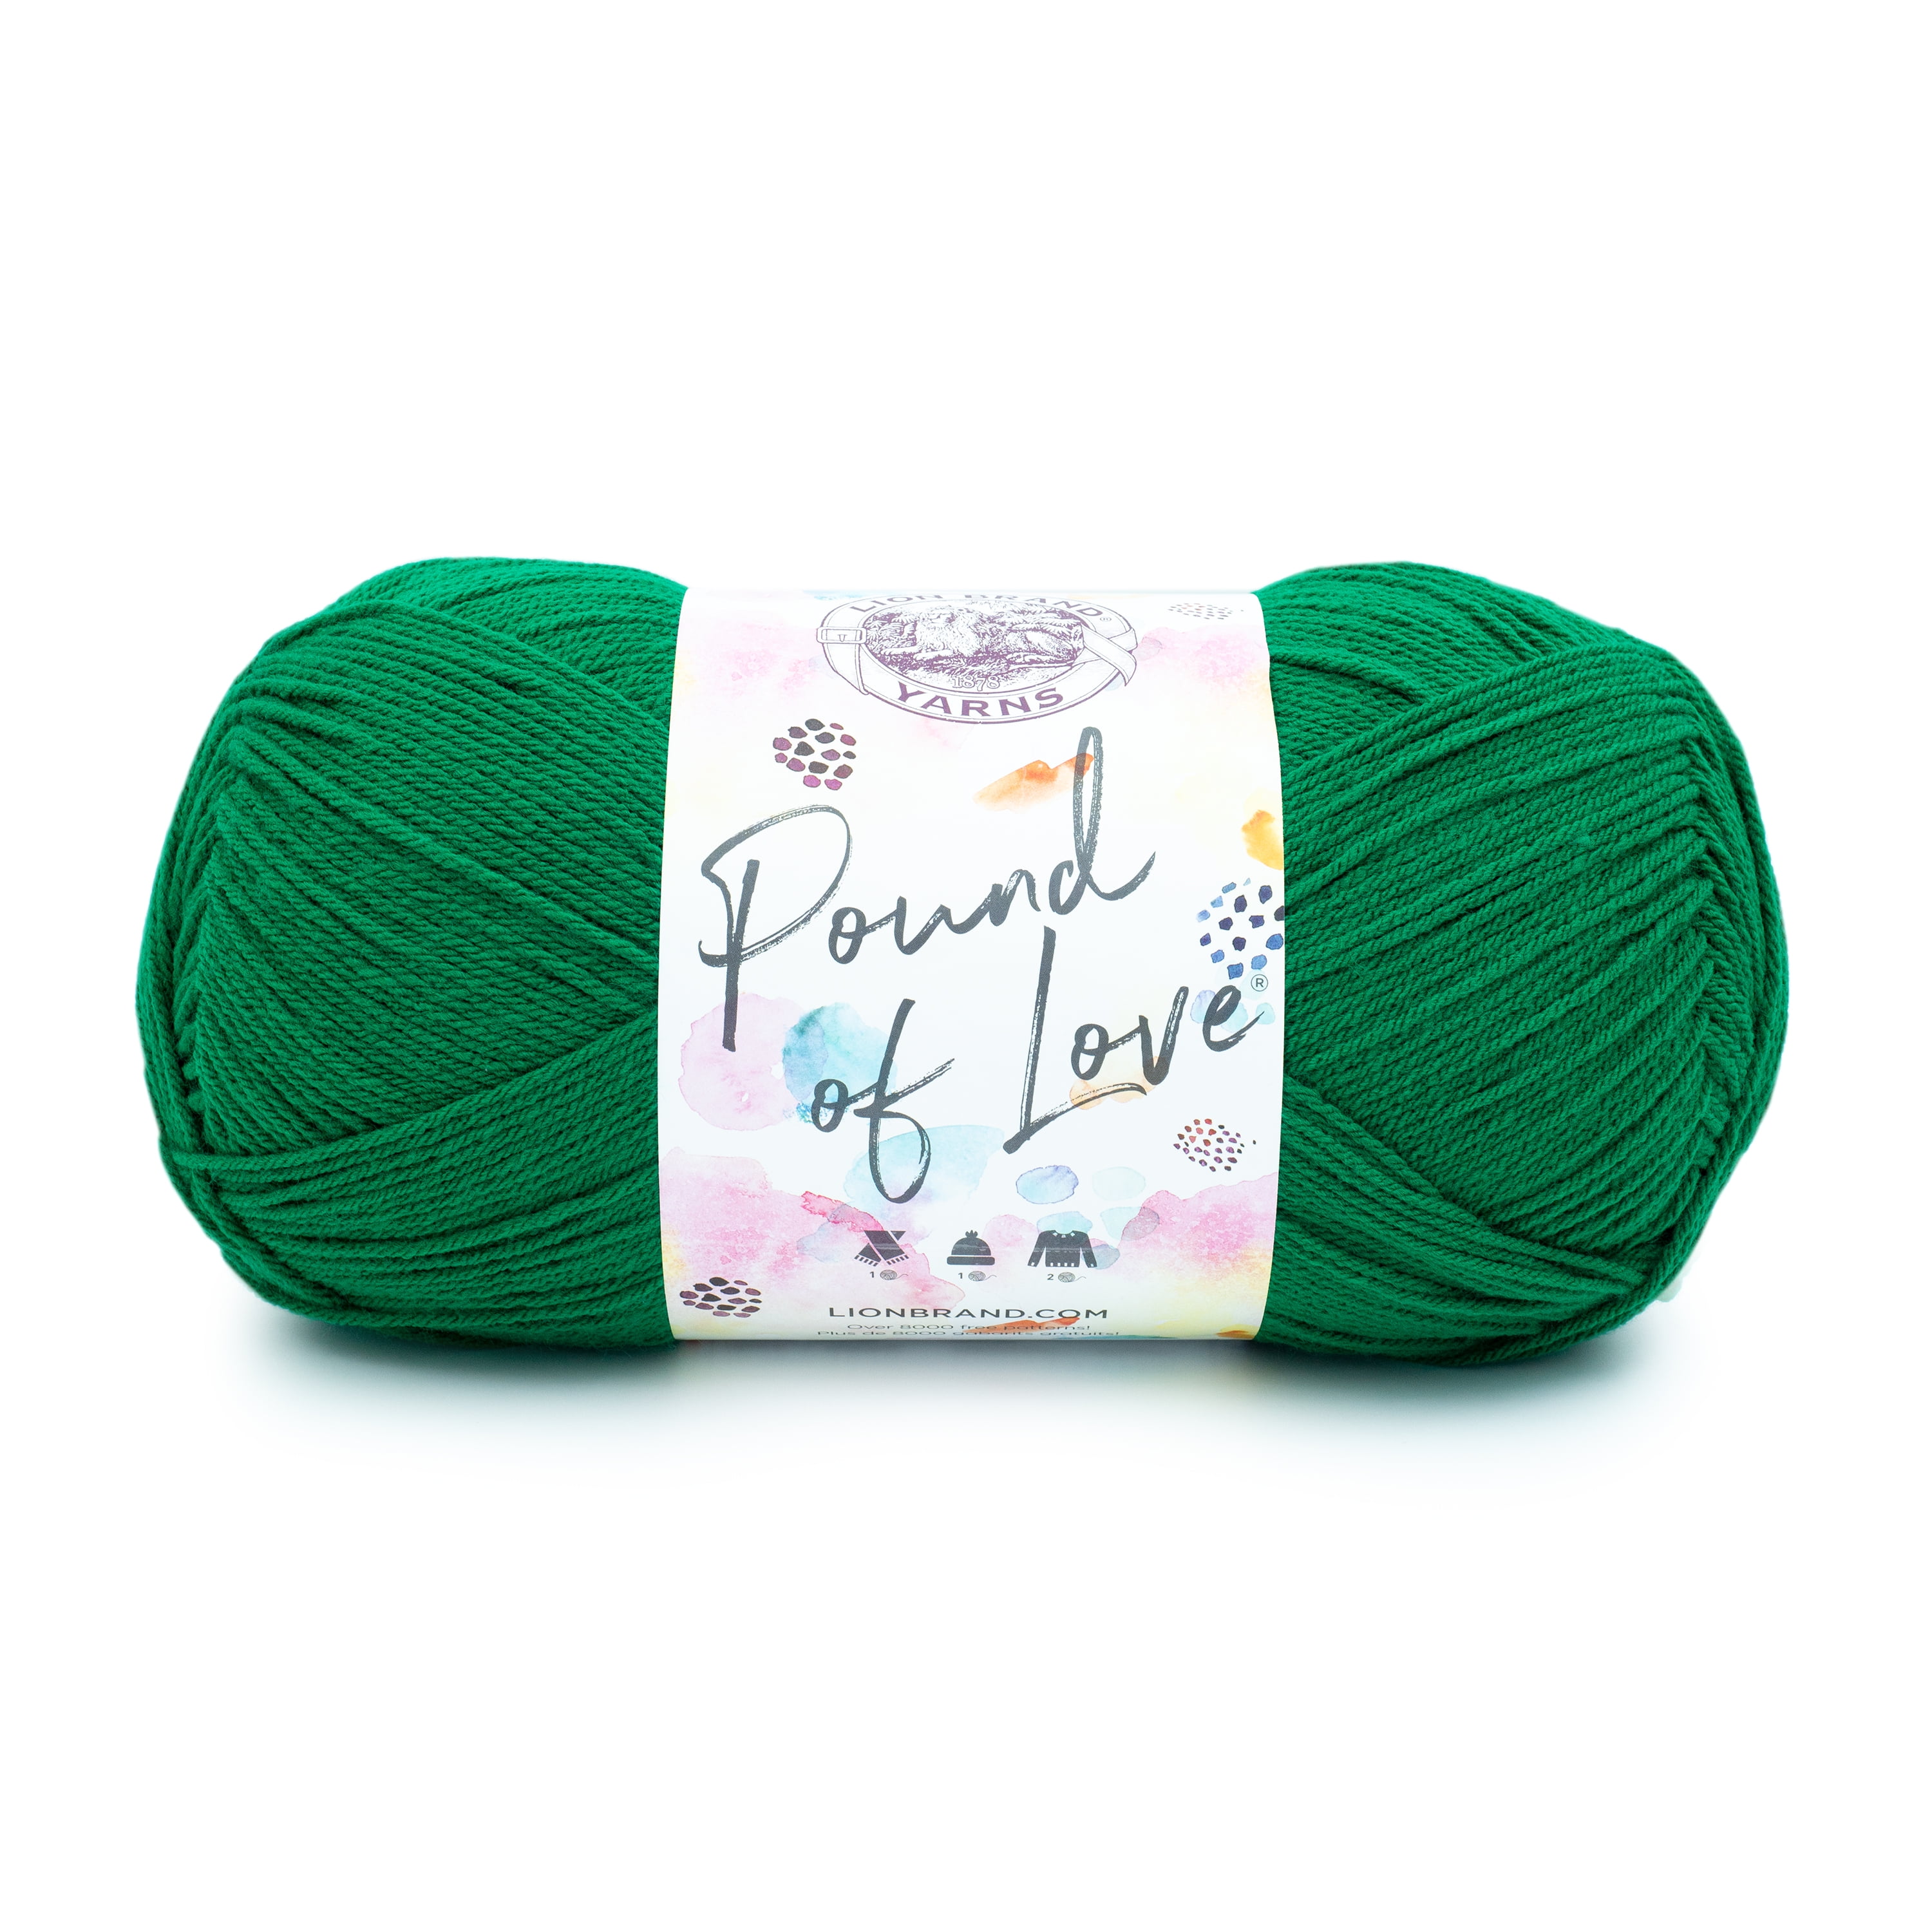 I Love Yarn Gifts & Merchandise for Sale